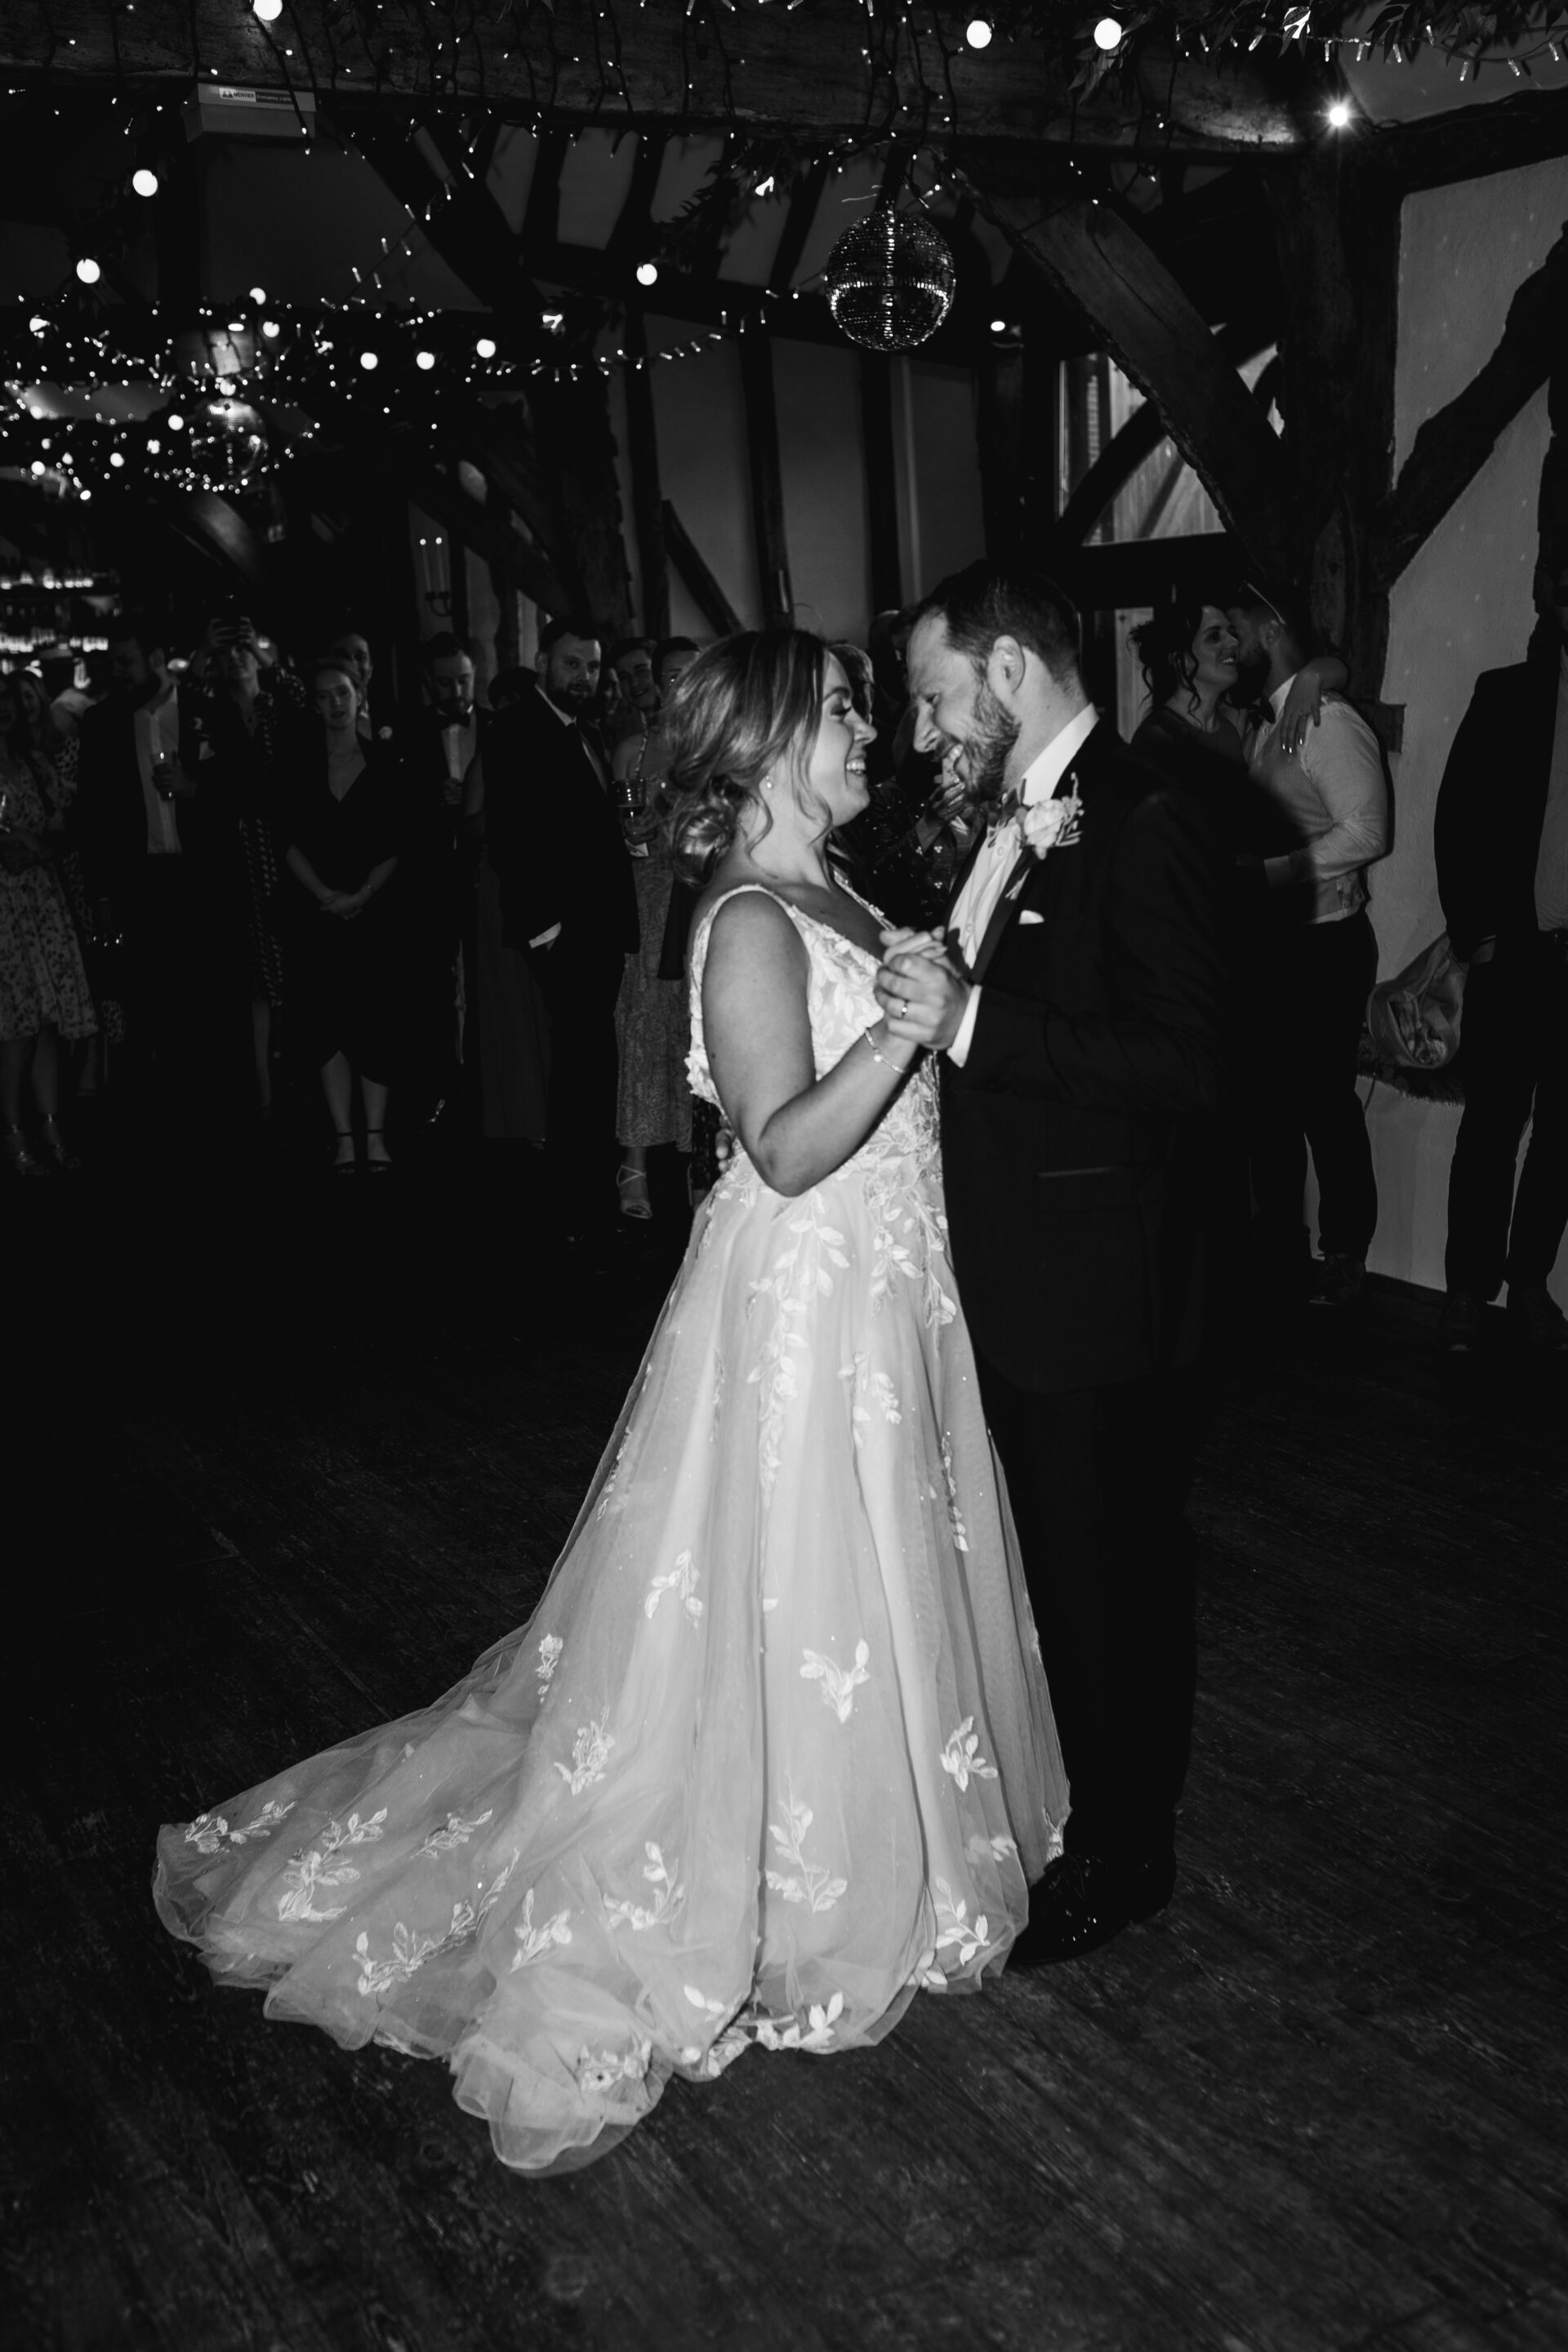 The bride and groom share their first dance at Old Luxters Barn wedding venue in Oxfordshire